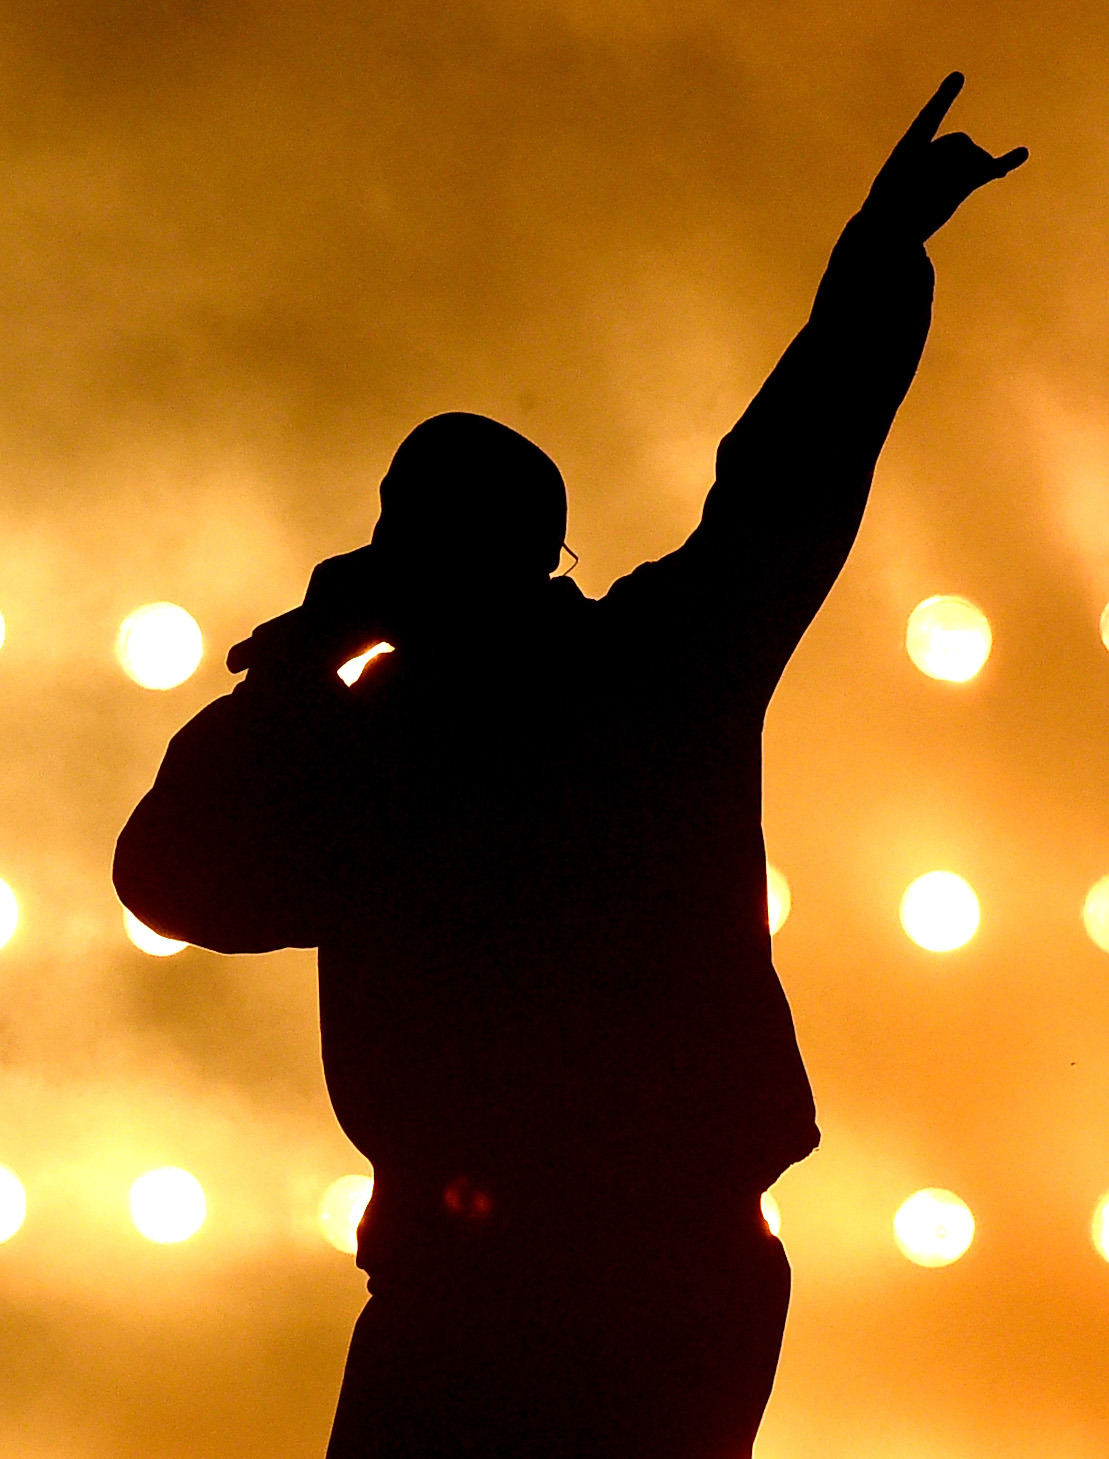 celebritiesofcolor:

Kanye West performs onstage during 102.7 KIIS FM’s 2015 Wango Tango at StubHub Center on May 9, 2015 in Los Angeles, California.